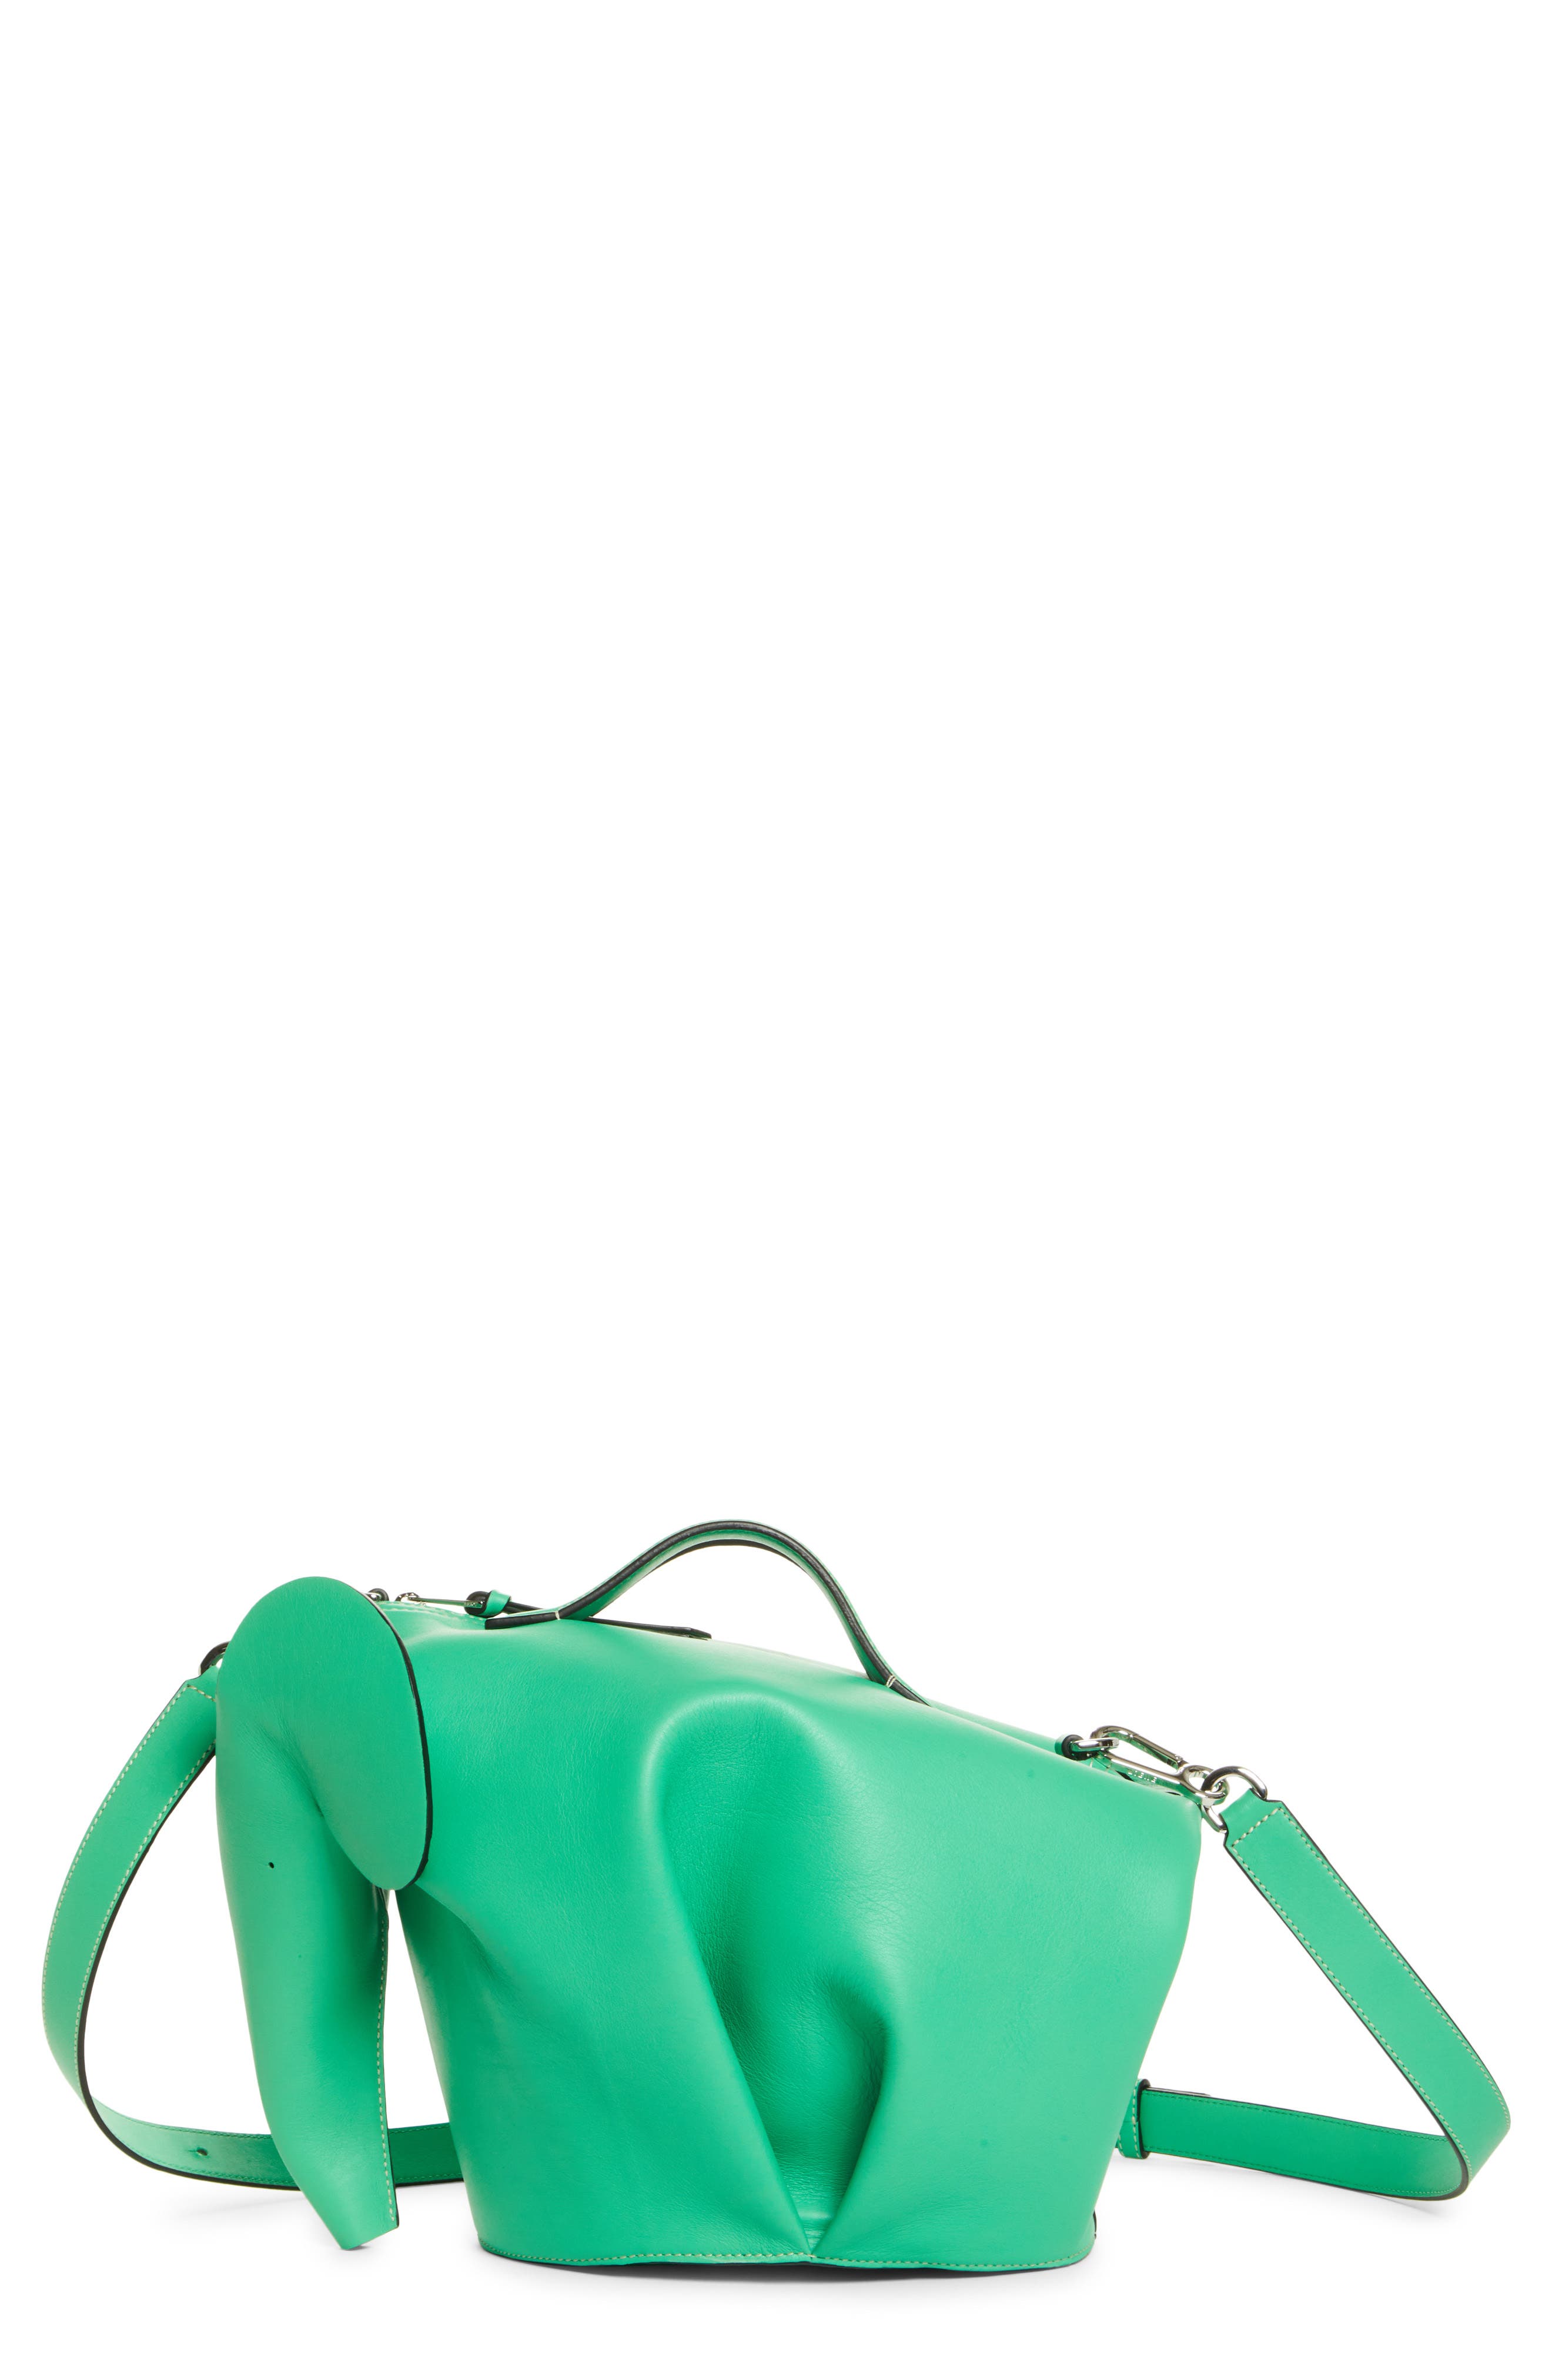 Loewe Large Elephant Leather Crossbody Bag in Apple Green at Nordstrom